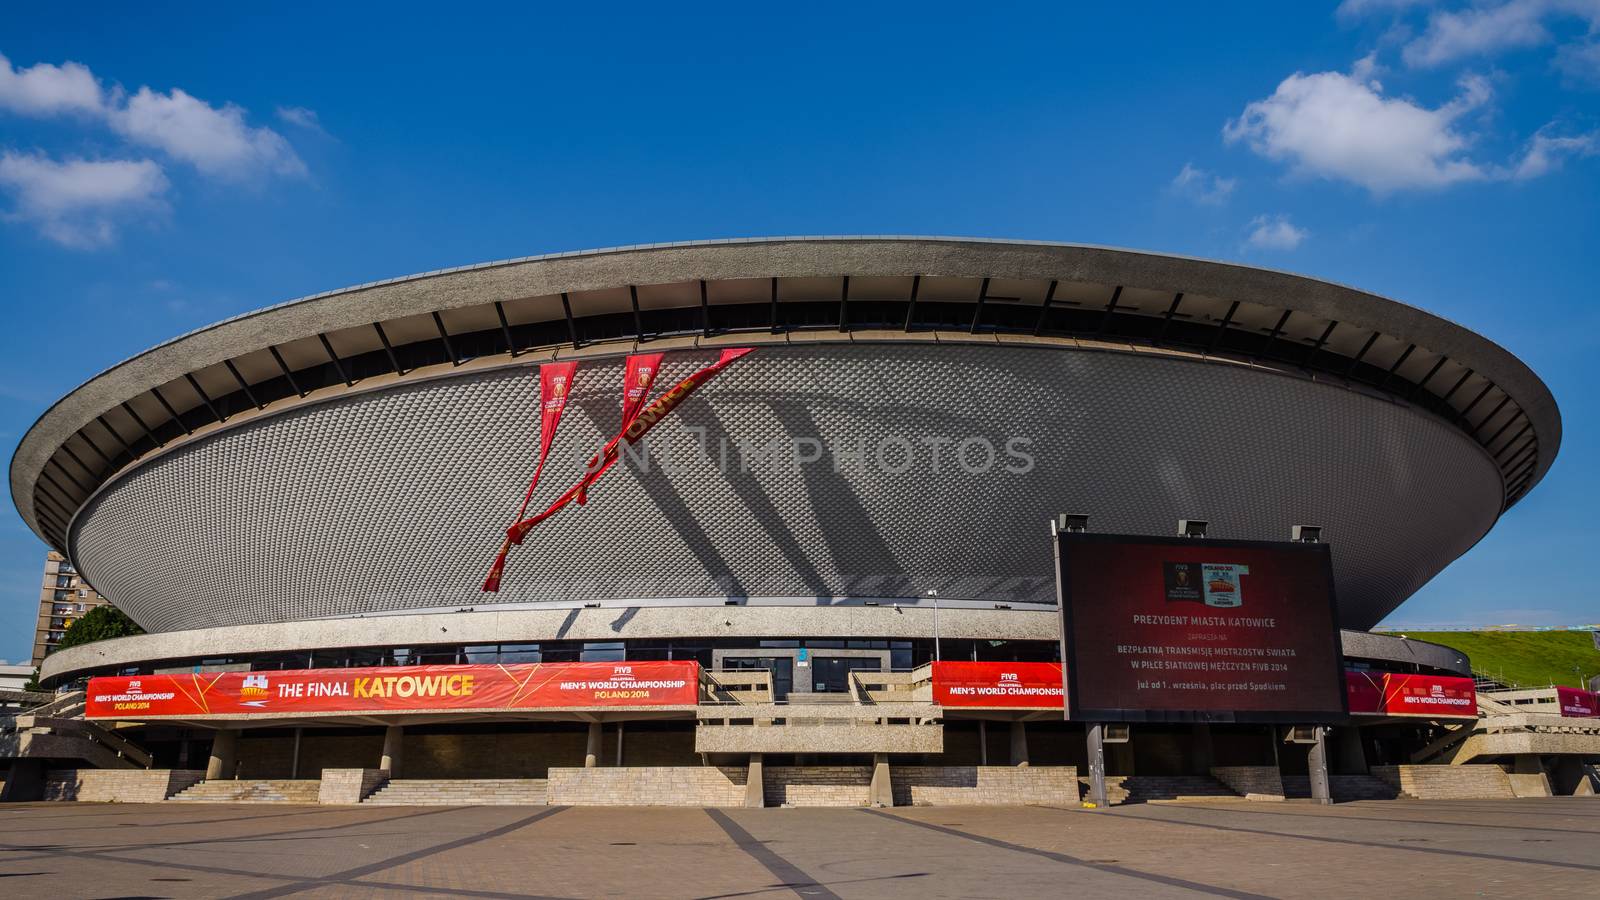 Sports hall Spodek Arena ready for FIVB Volleyball Men's World Championship Poland 2014. Spodek Arena hosts 30 of 103 matches including the final on September 21.